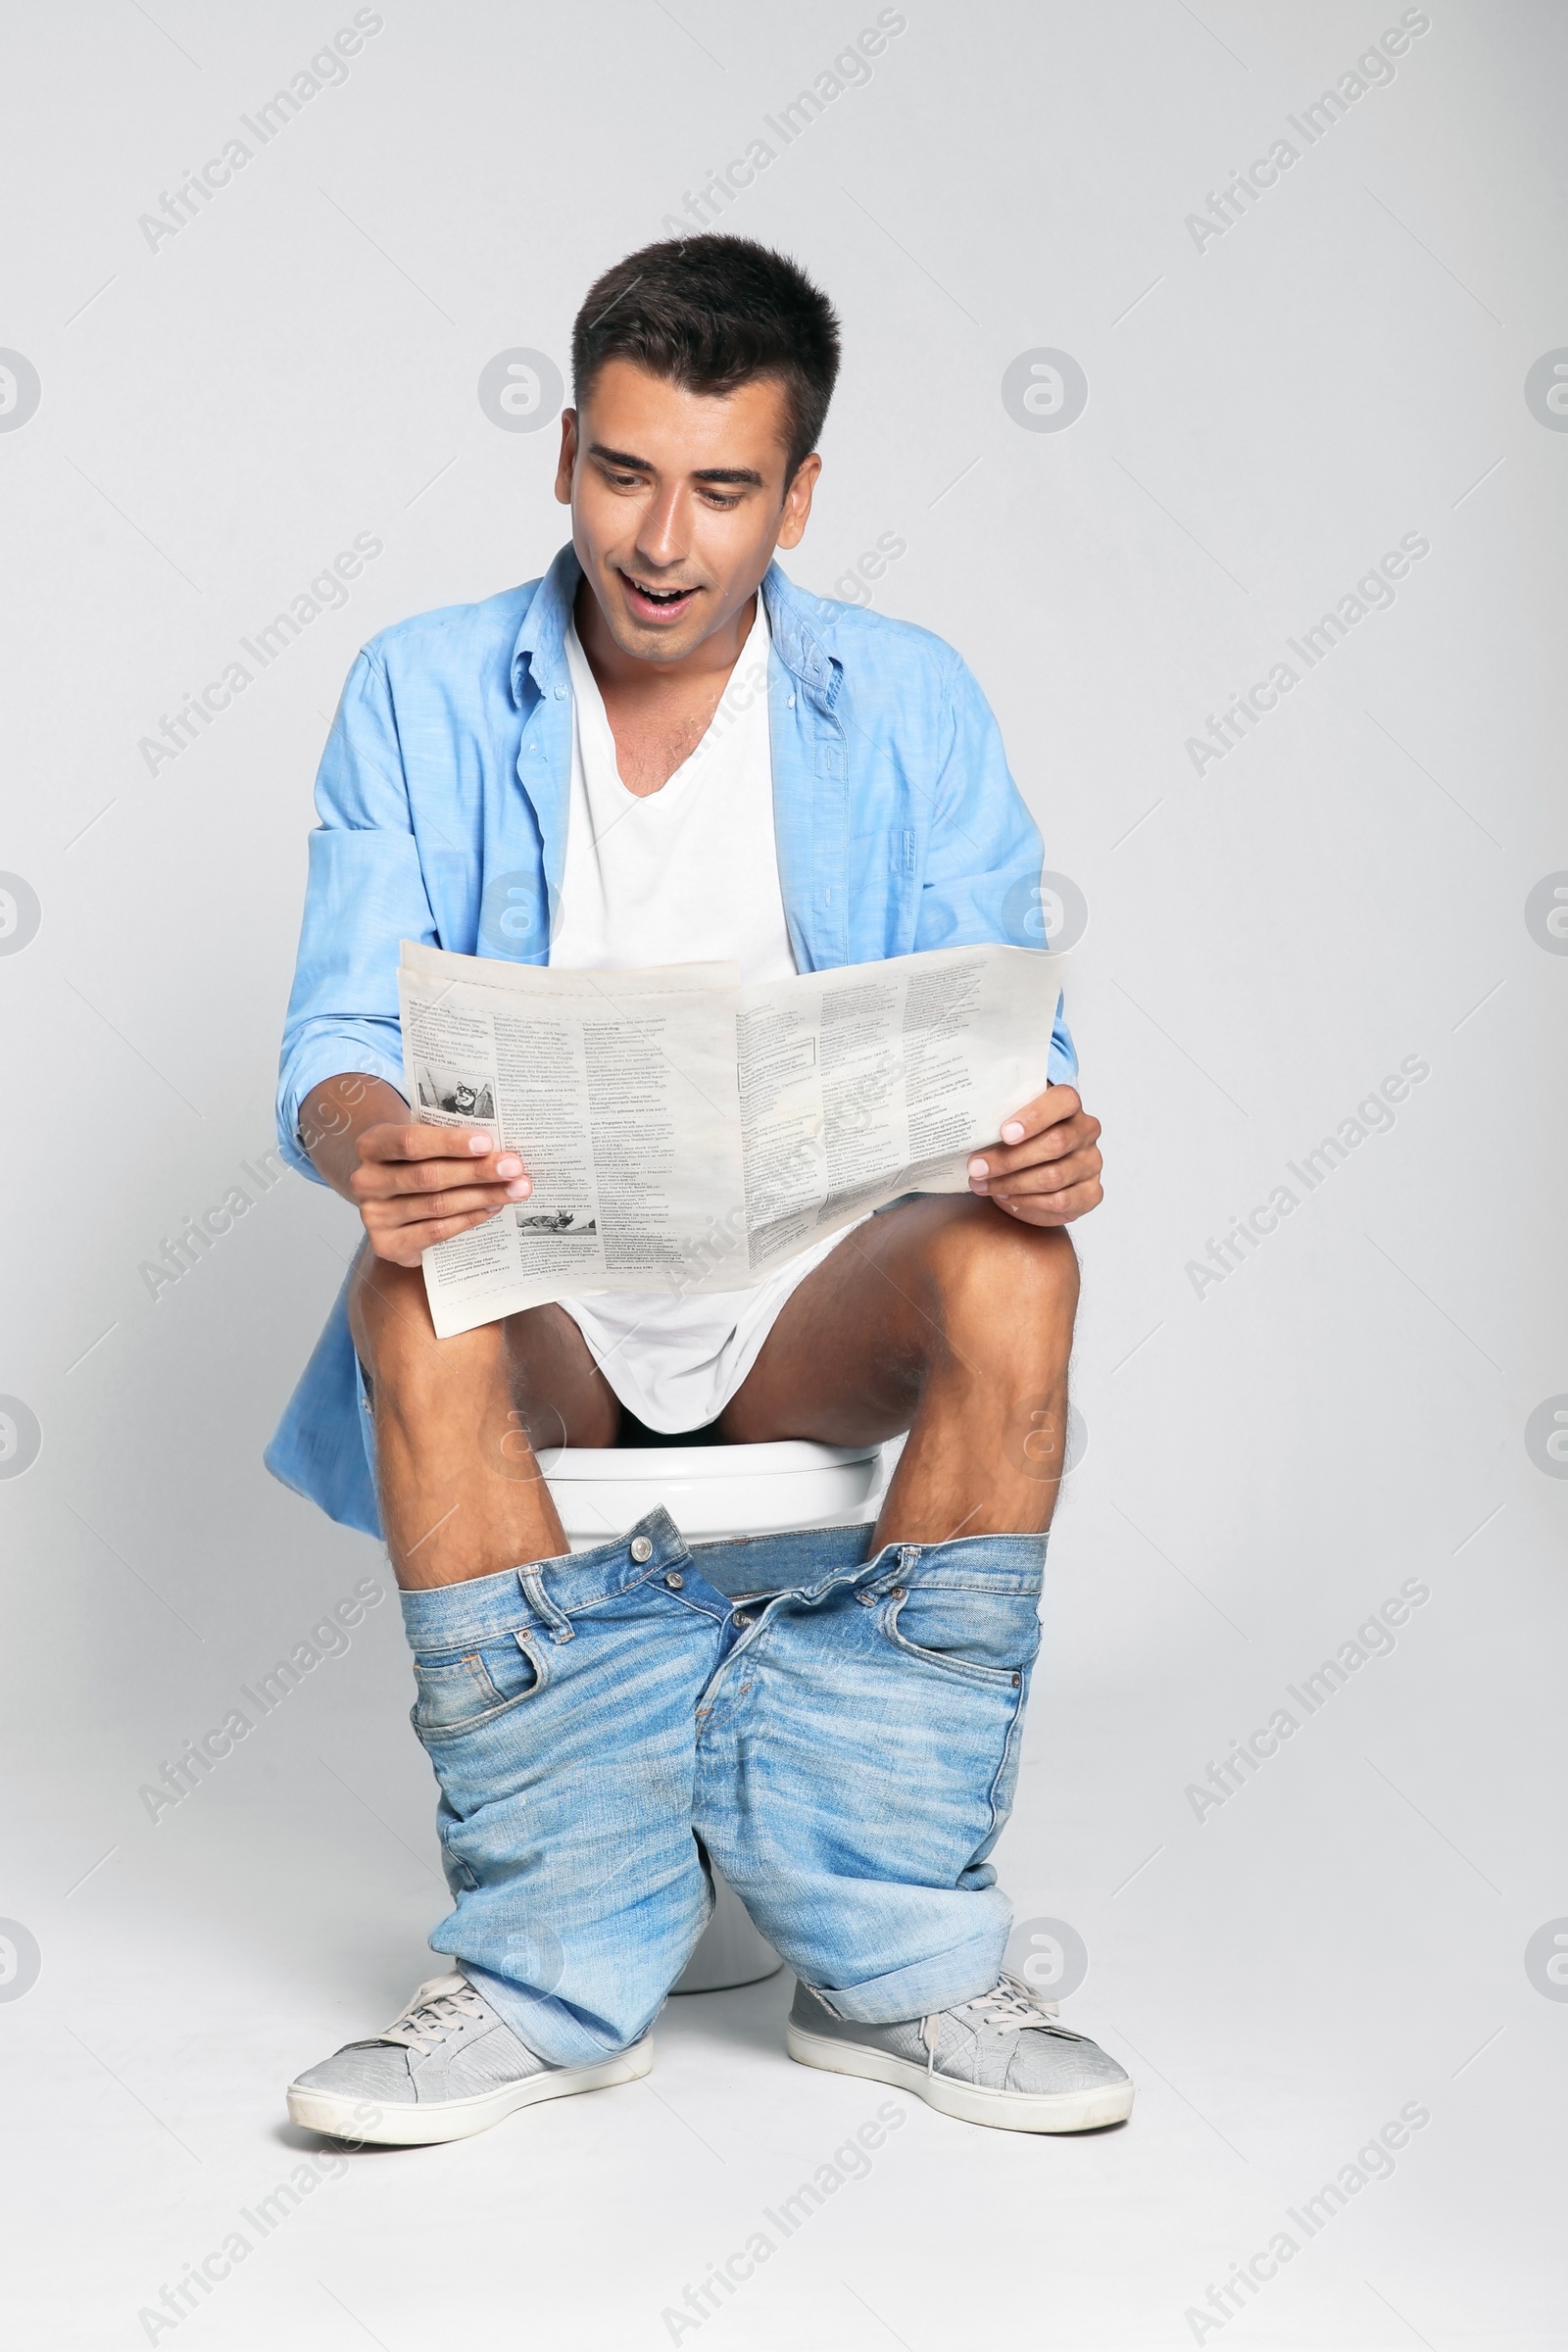 Photo of Young man reading newspaper while sitting on toilet bowl against gray background